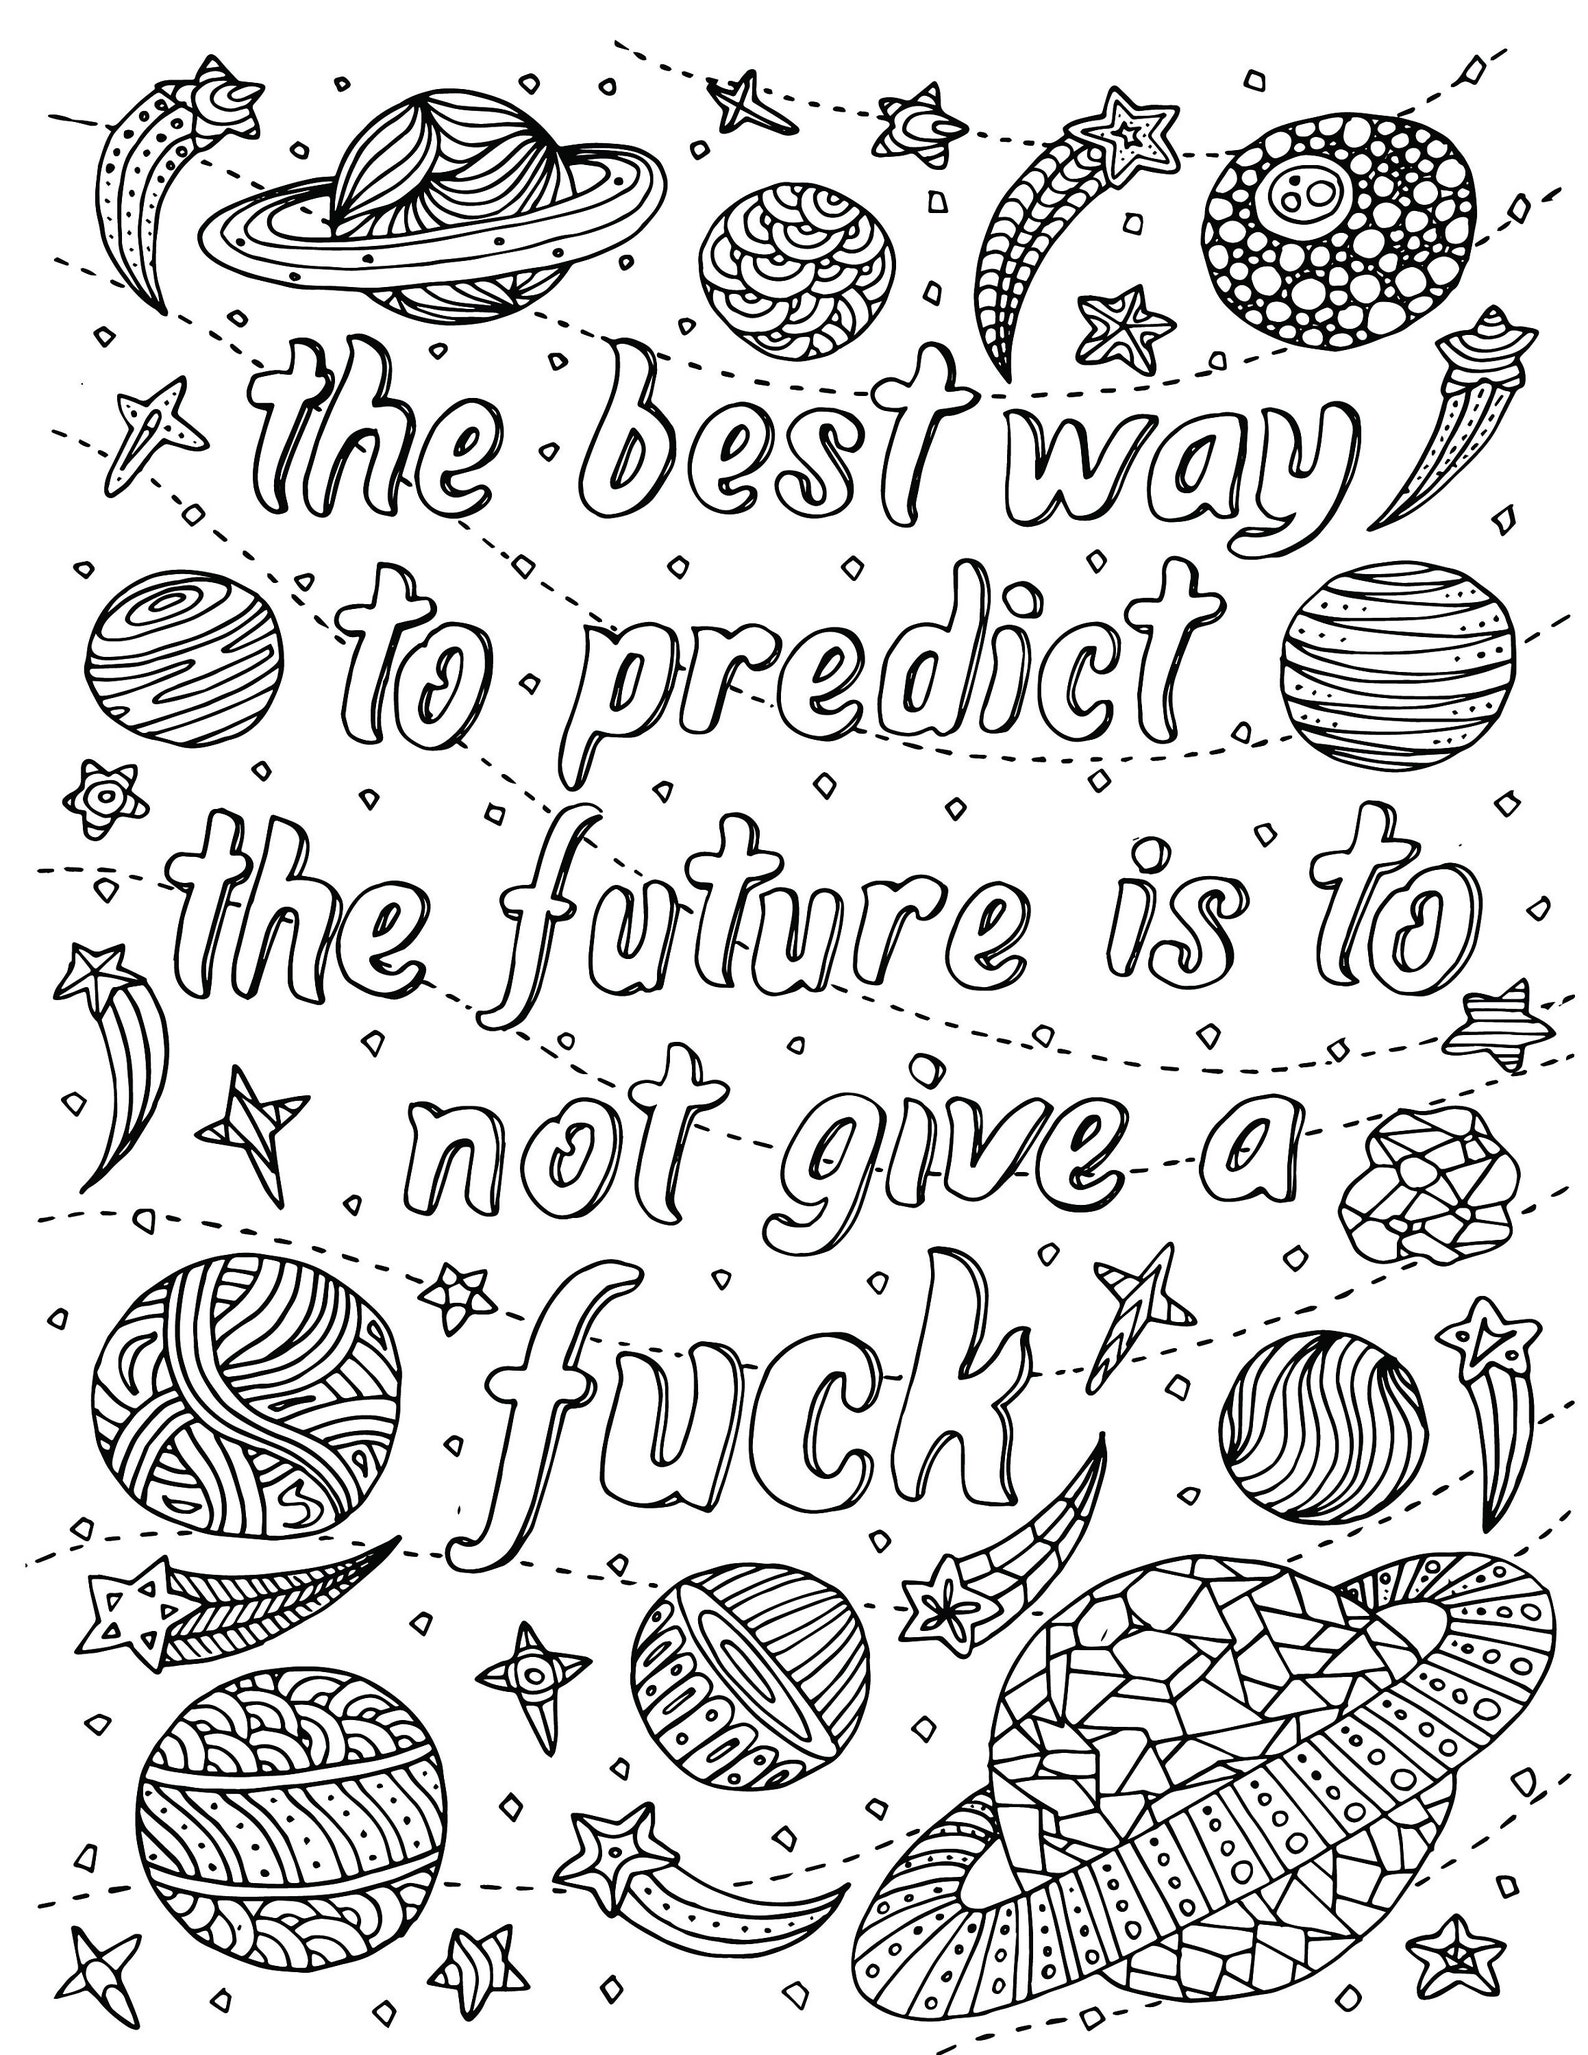 Swearing Motivational Quotes Coloring Book Adult Printable | Etsy UK